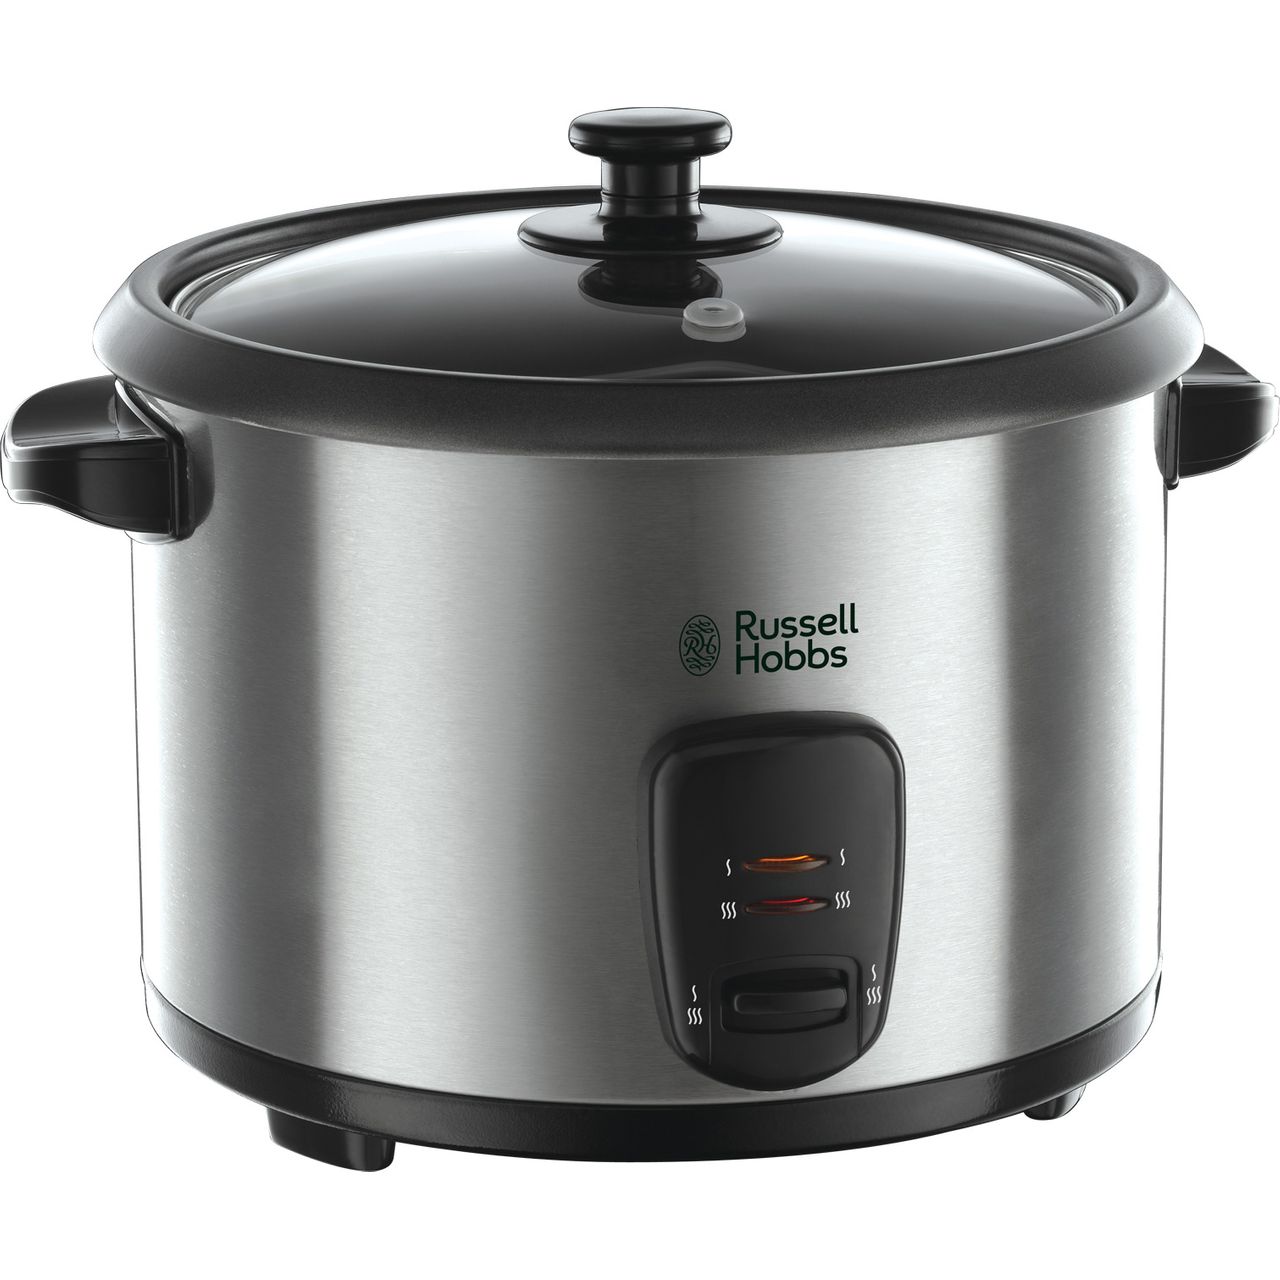 Russell Hobbs 19750 1.8 Litre Rice Cooker Review